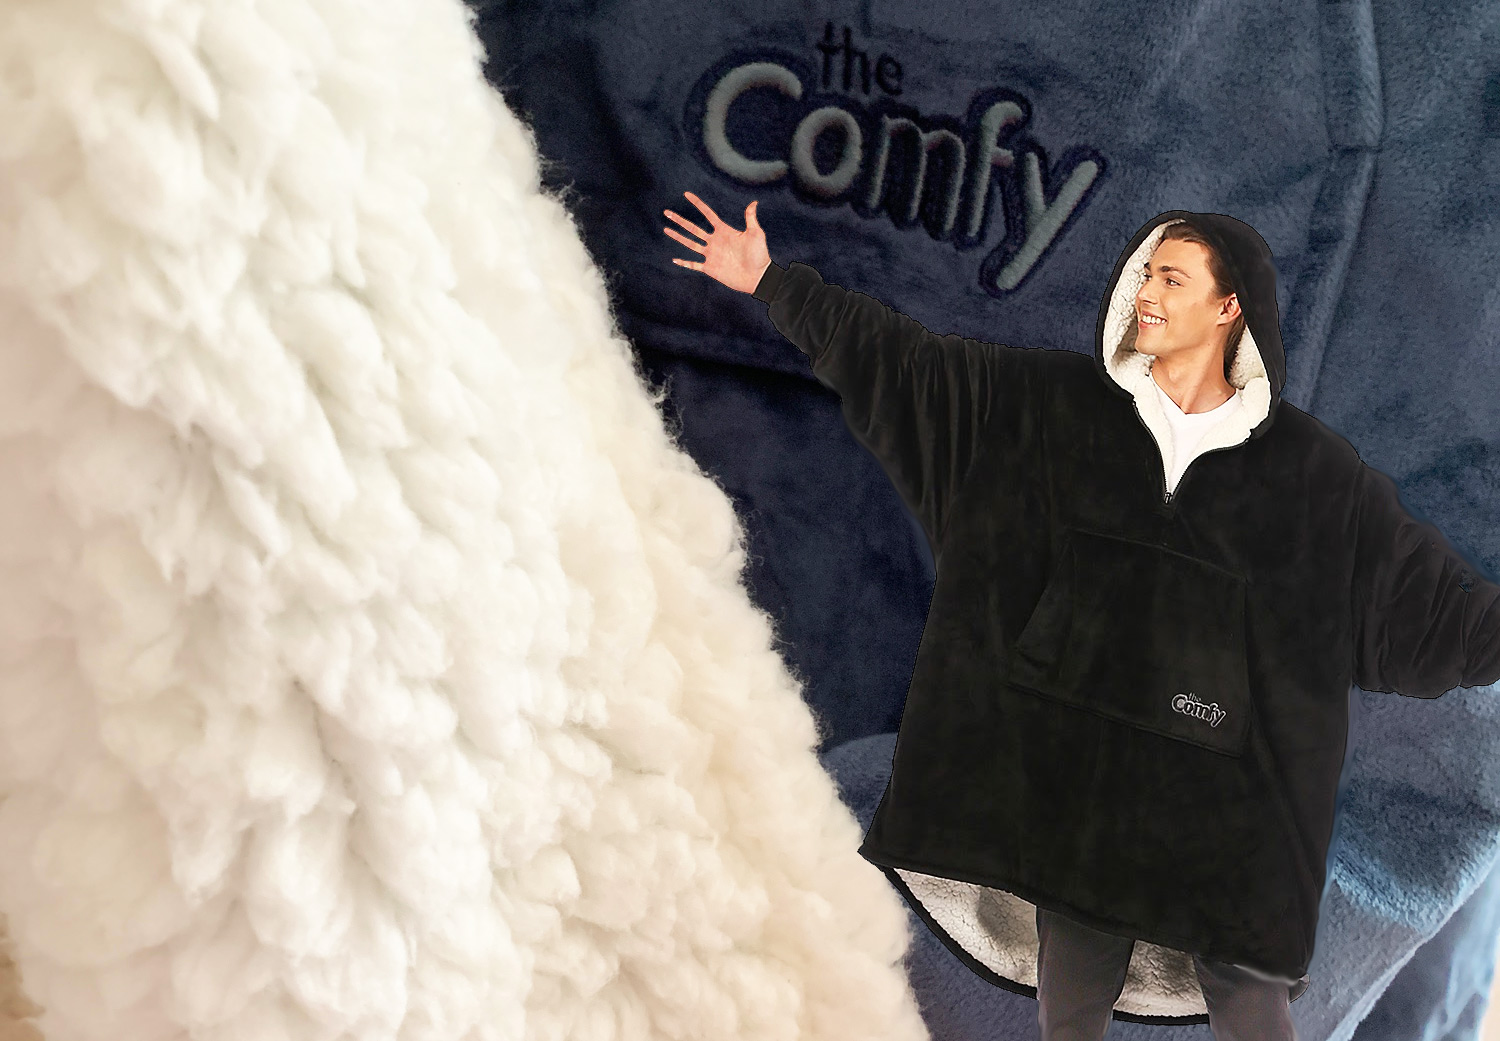 The Comfy Oversized Wearable Blanket Is on Sale at